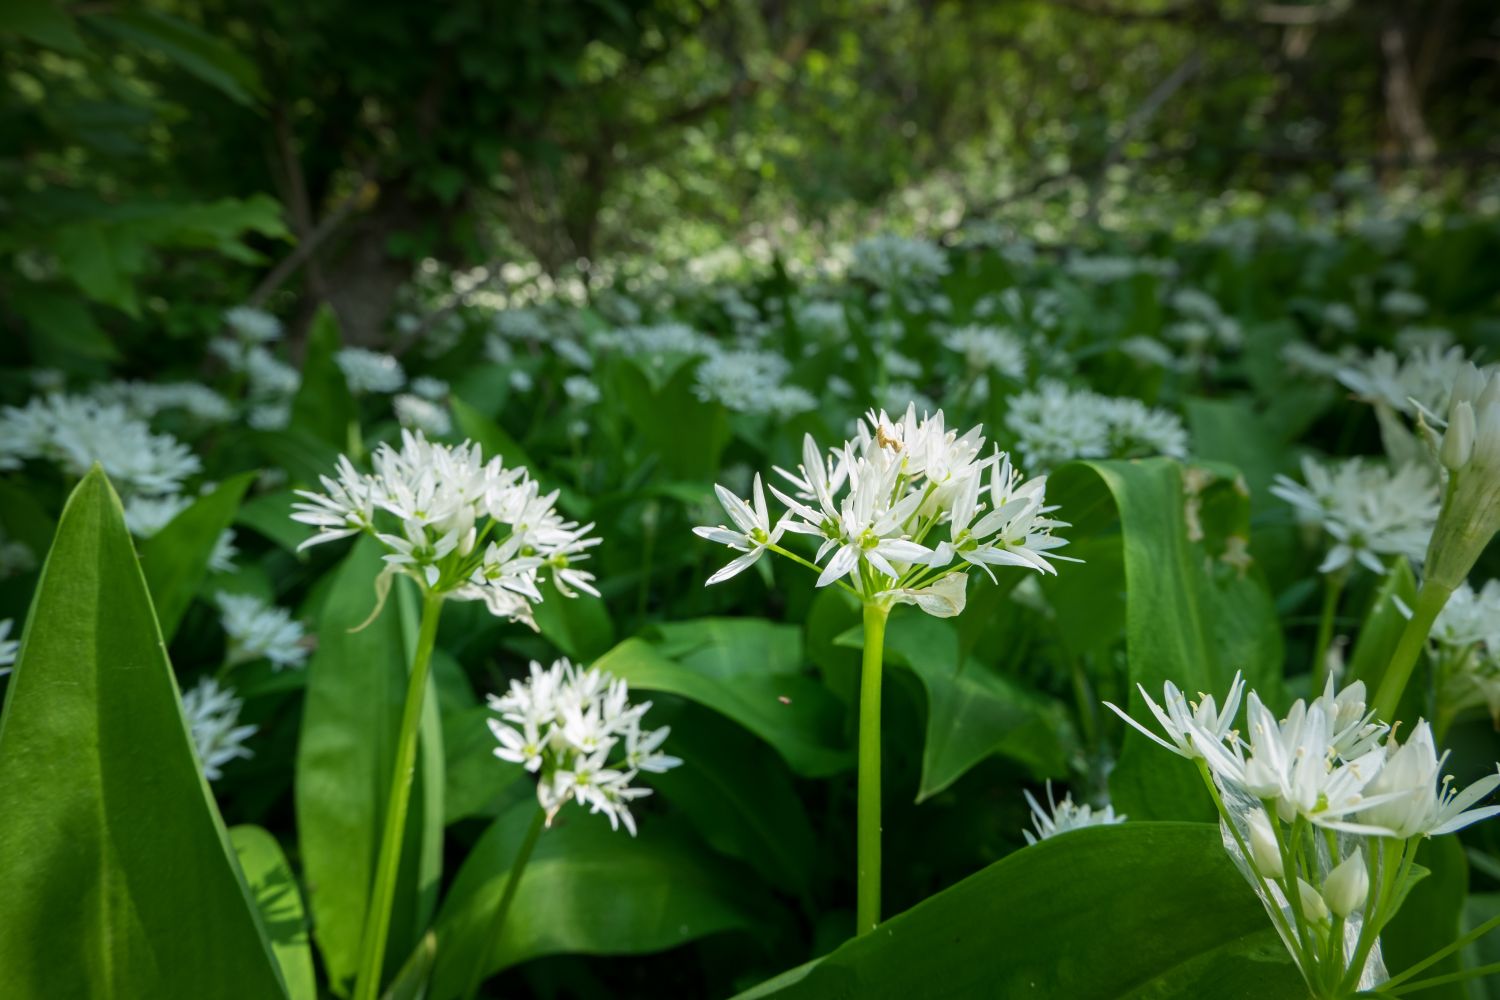 White flowers and leaves of the wild garlic plant